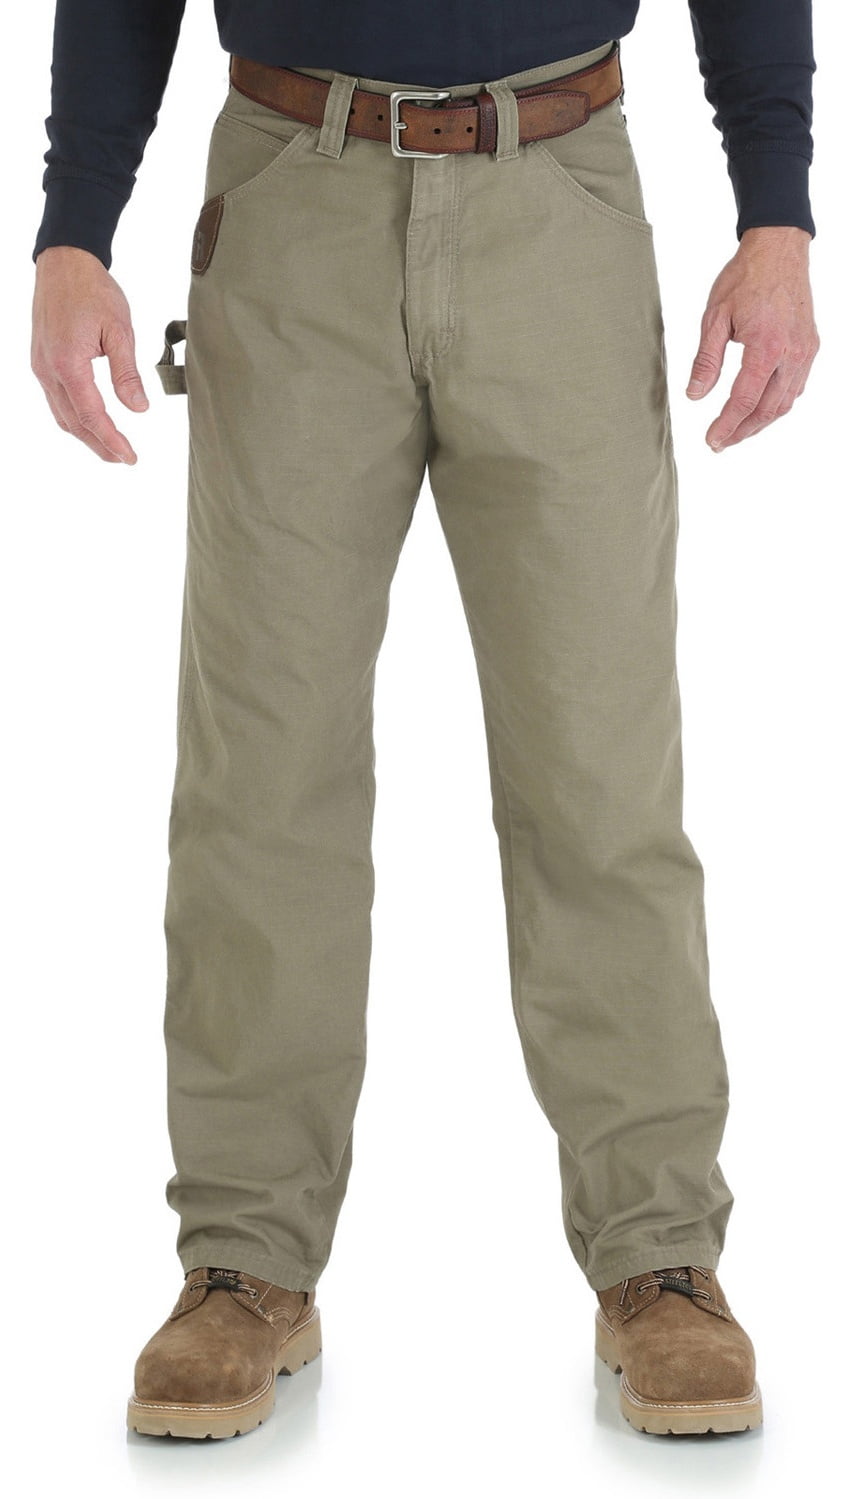 wrangler riggs lined pants